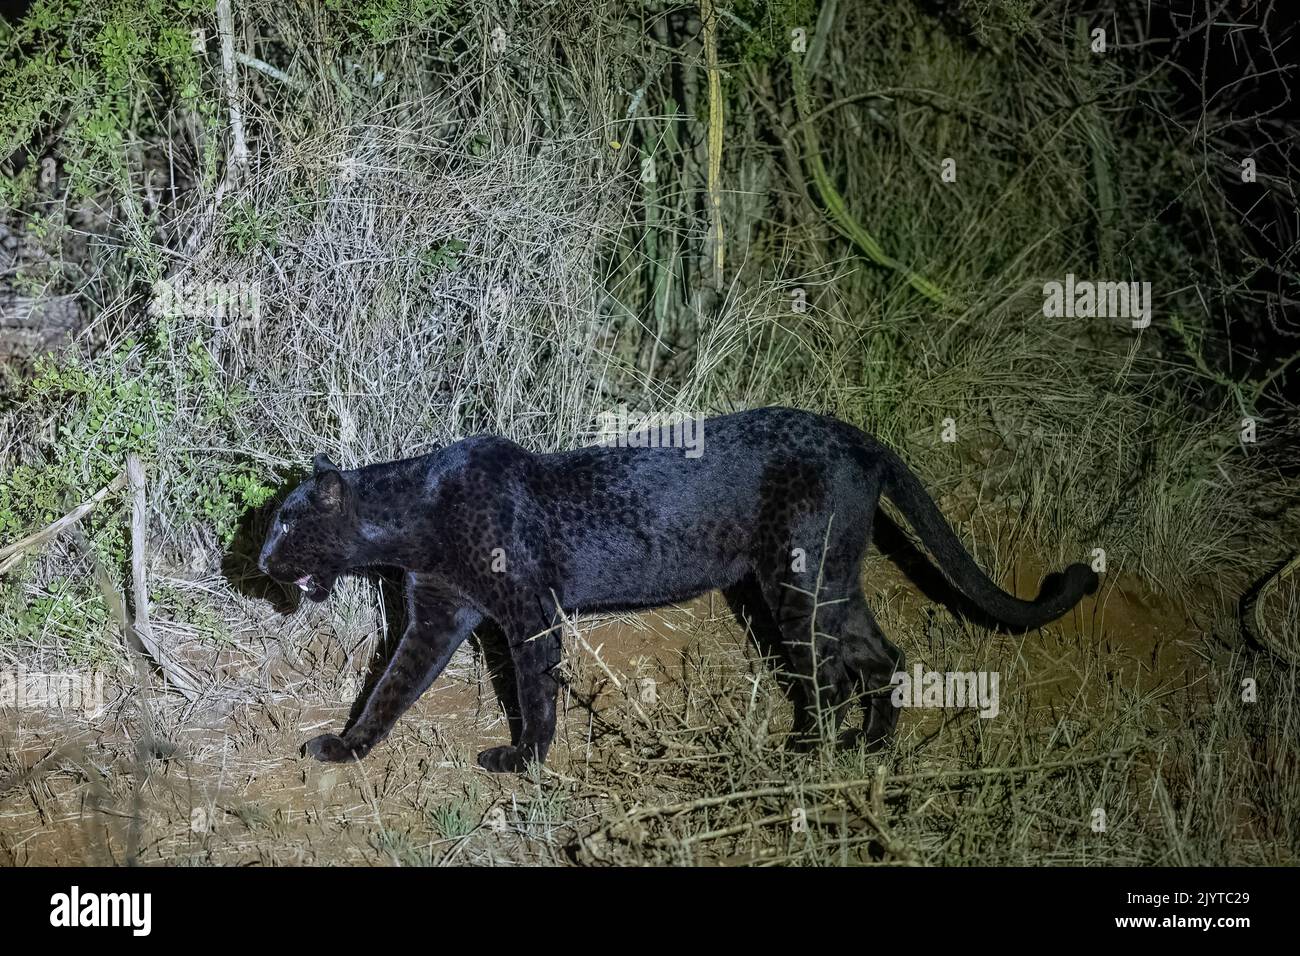 Extremely rare photo of a Black Panther or African Black Leopard (Panthera pardus pardus), melanistic form, evolving at night in dry shrubby savannah, very special leopard subspecies, Laikipia County, Kenya, East Africa, Africa Stock Photo